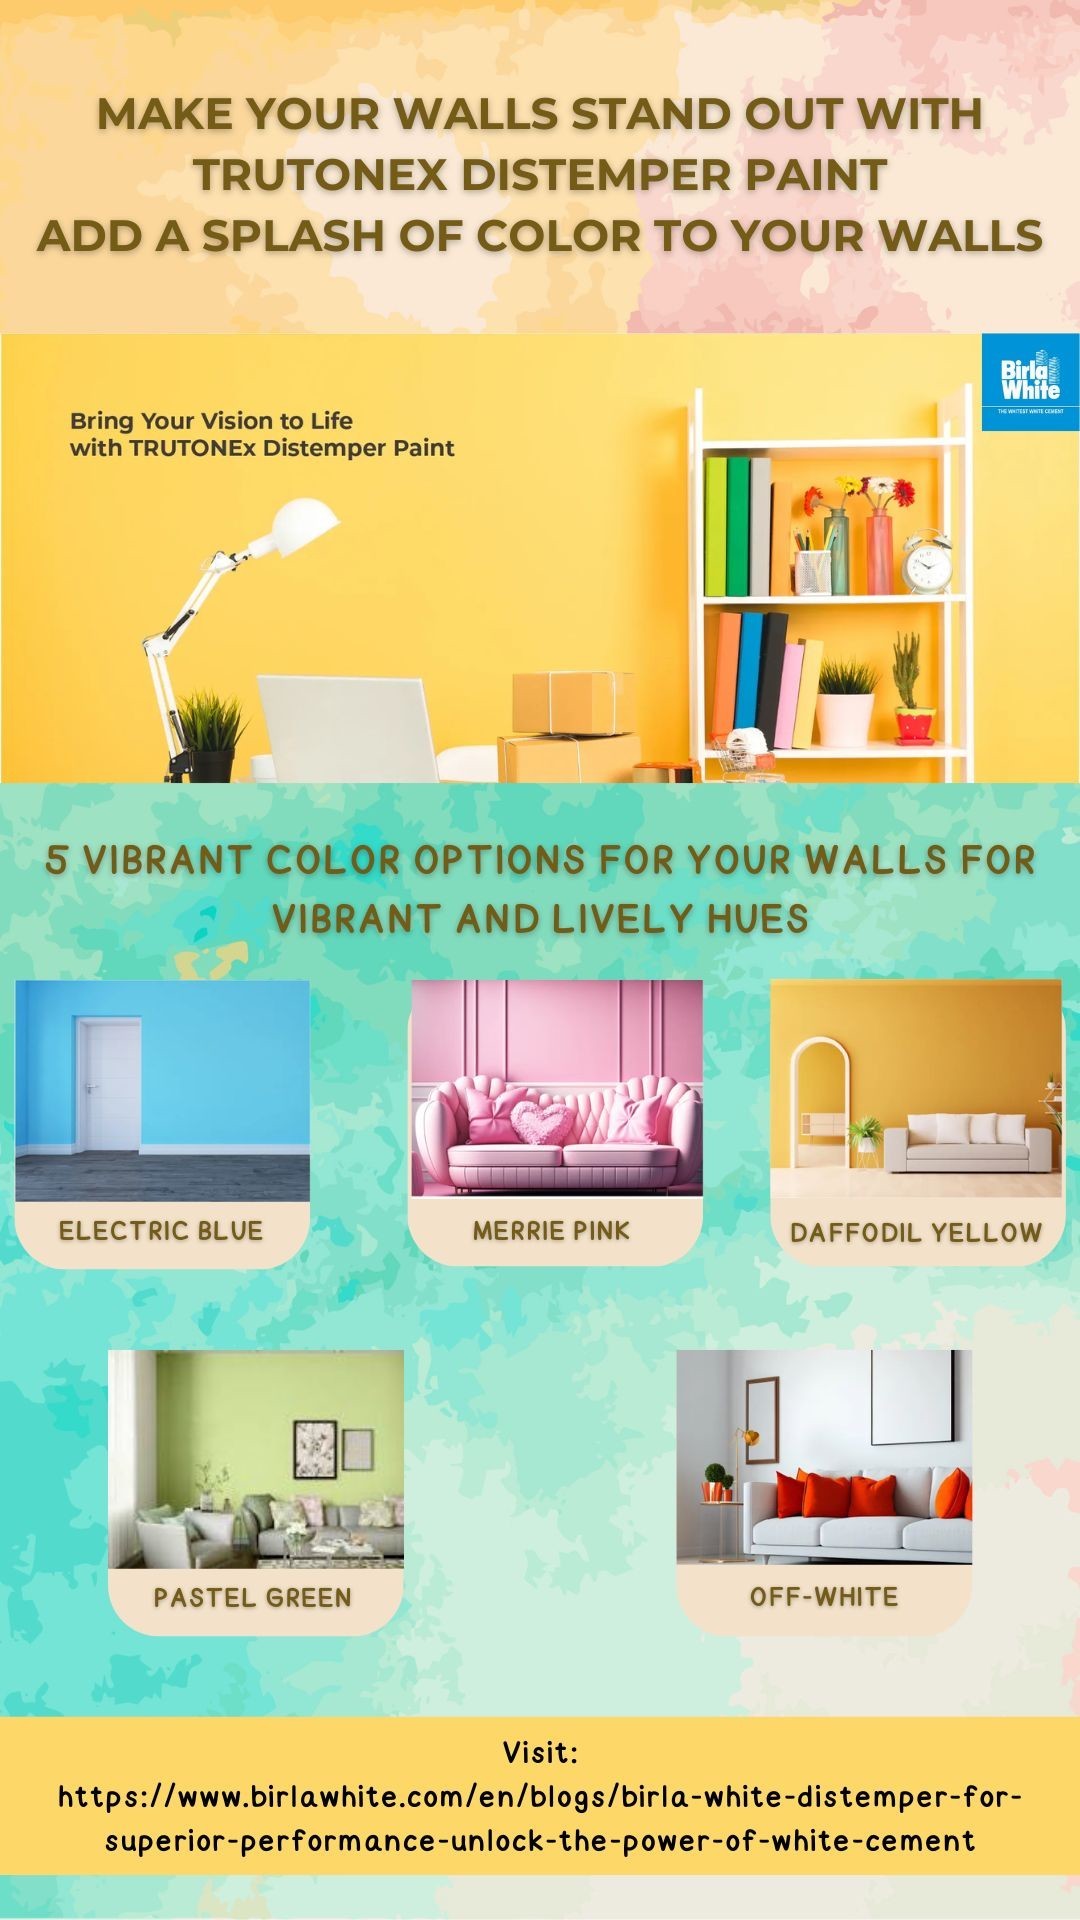 5 VIBRANT COLOR OPTIONS FOR YOUR WALLS